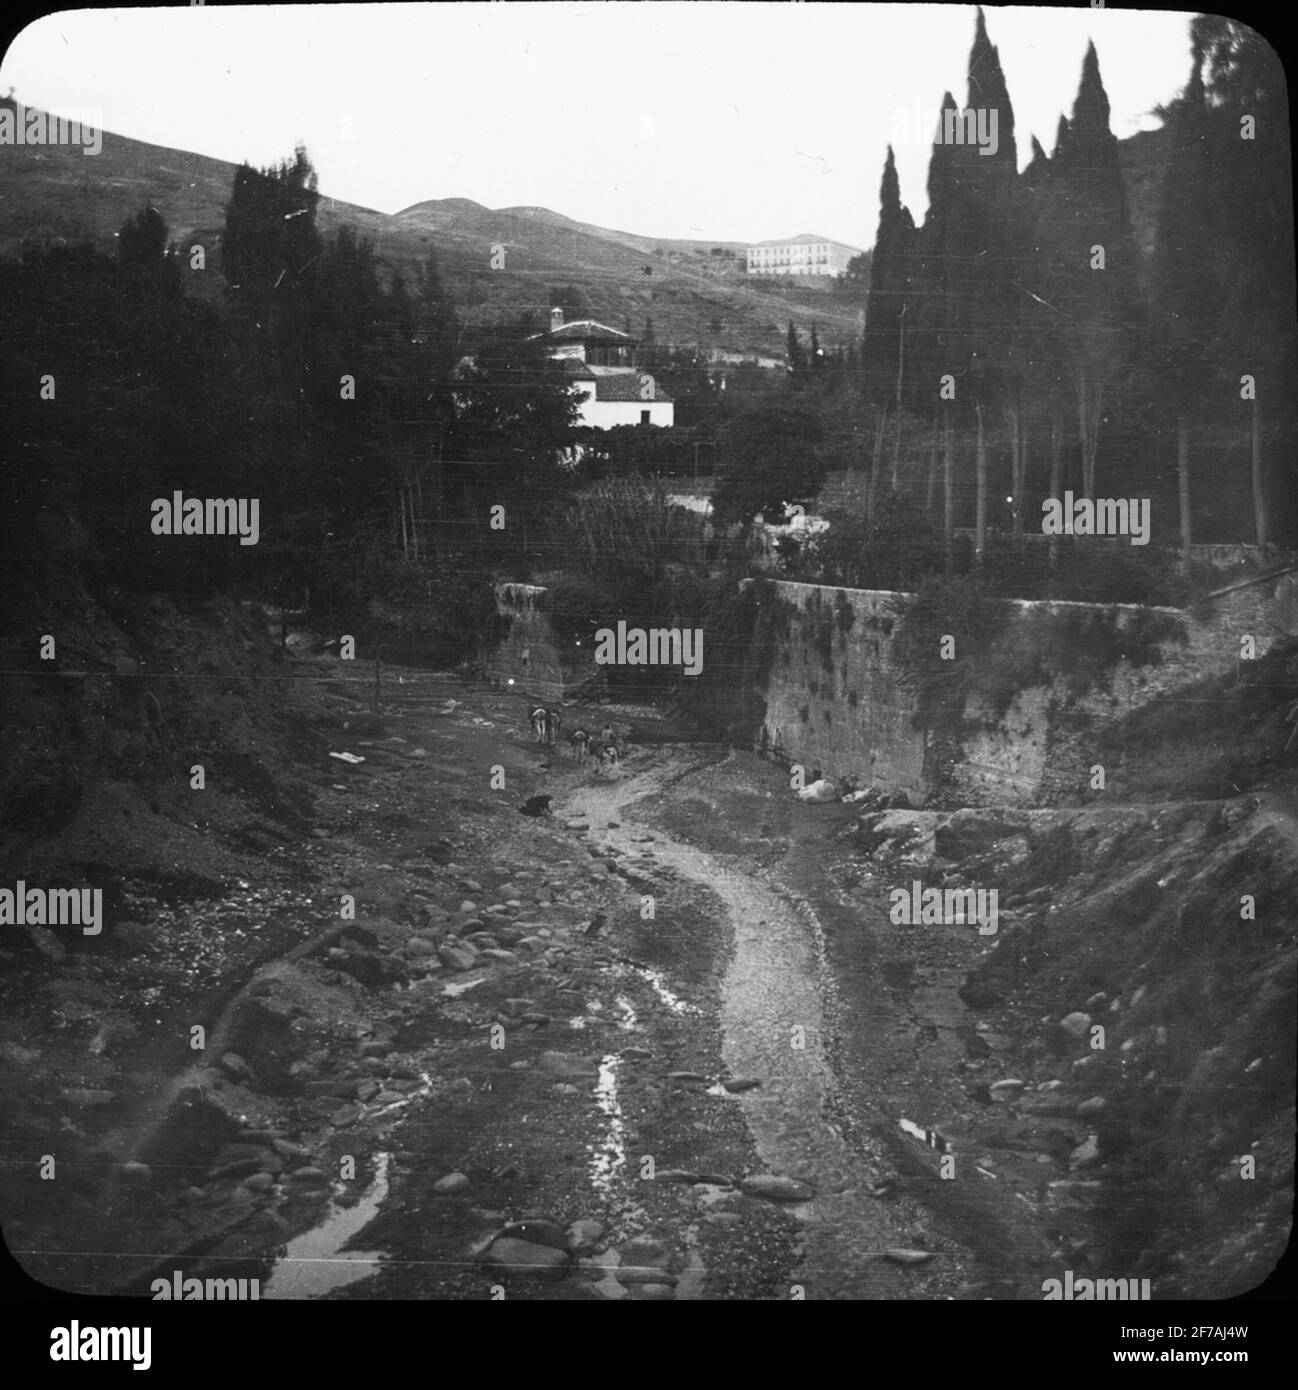 Skiopty icon with motifs of watercourses, Granada image has been stored in cardboard labeled: Höstesan 1910. Granada 9. N: 29. Text on image: 'Darro above Hot Bosque'. Stock Photo